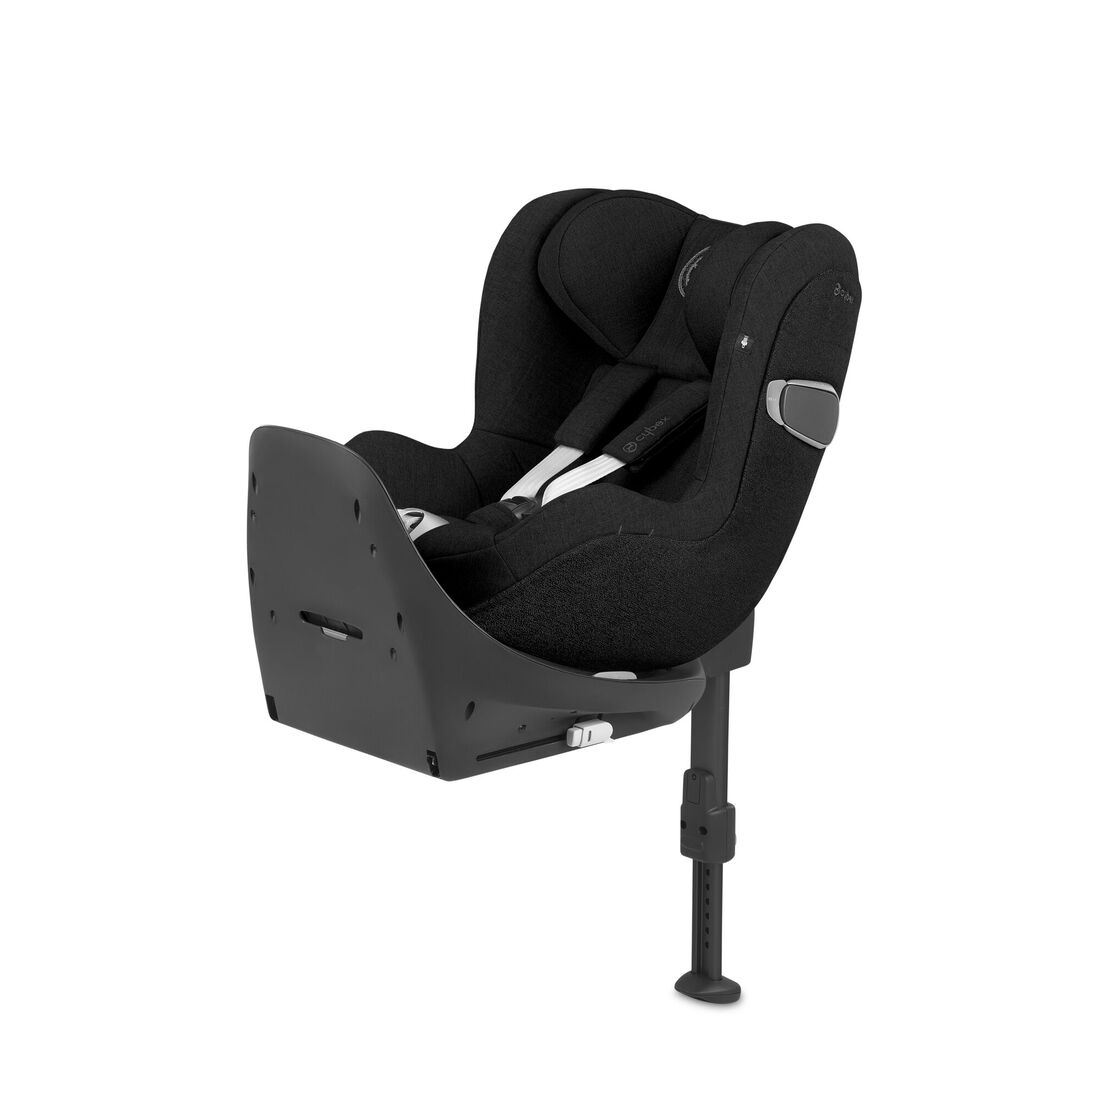 CYBEX Configure your Z-Line Modular System for EUR 259.95-479.95 